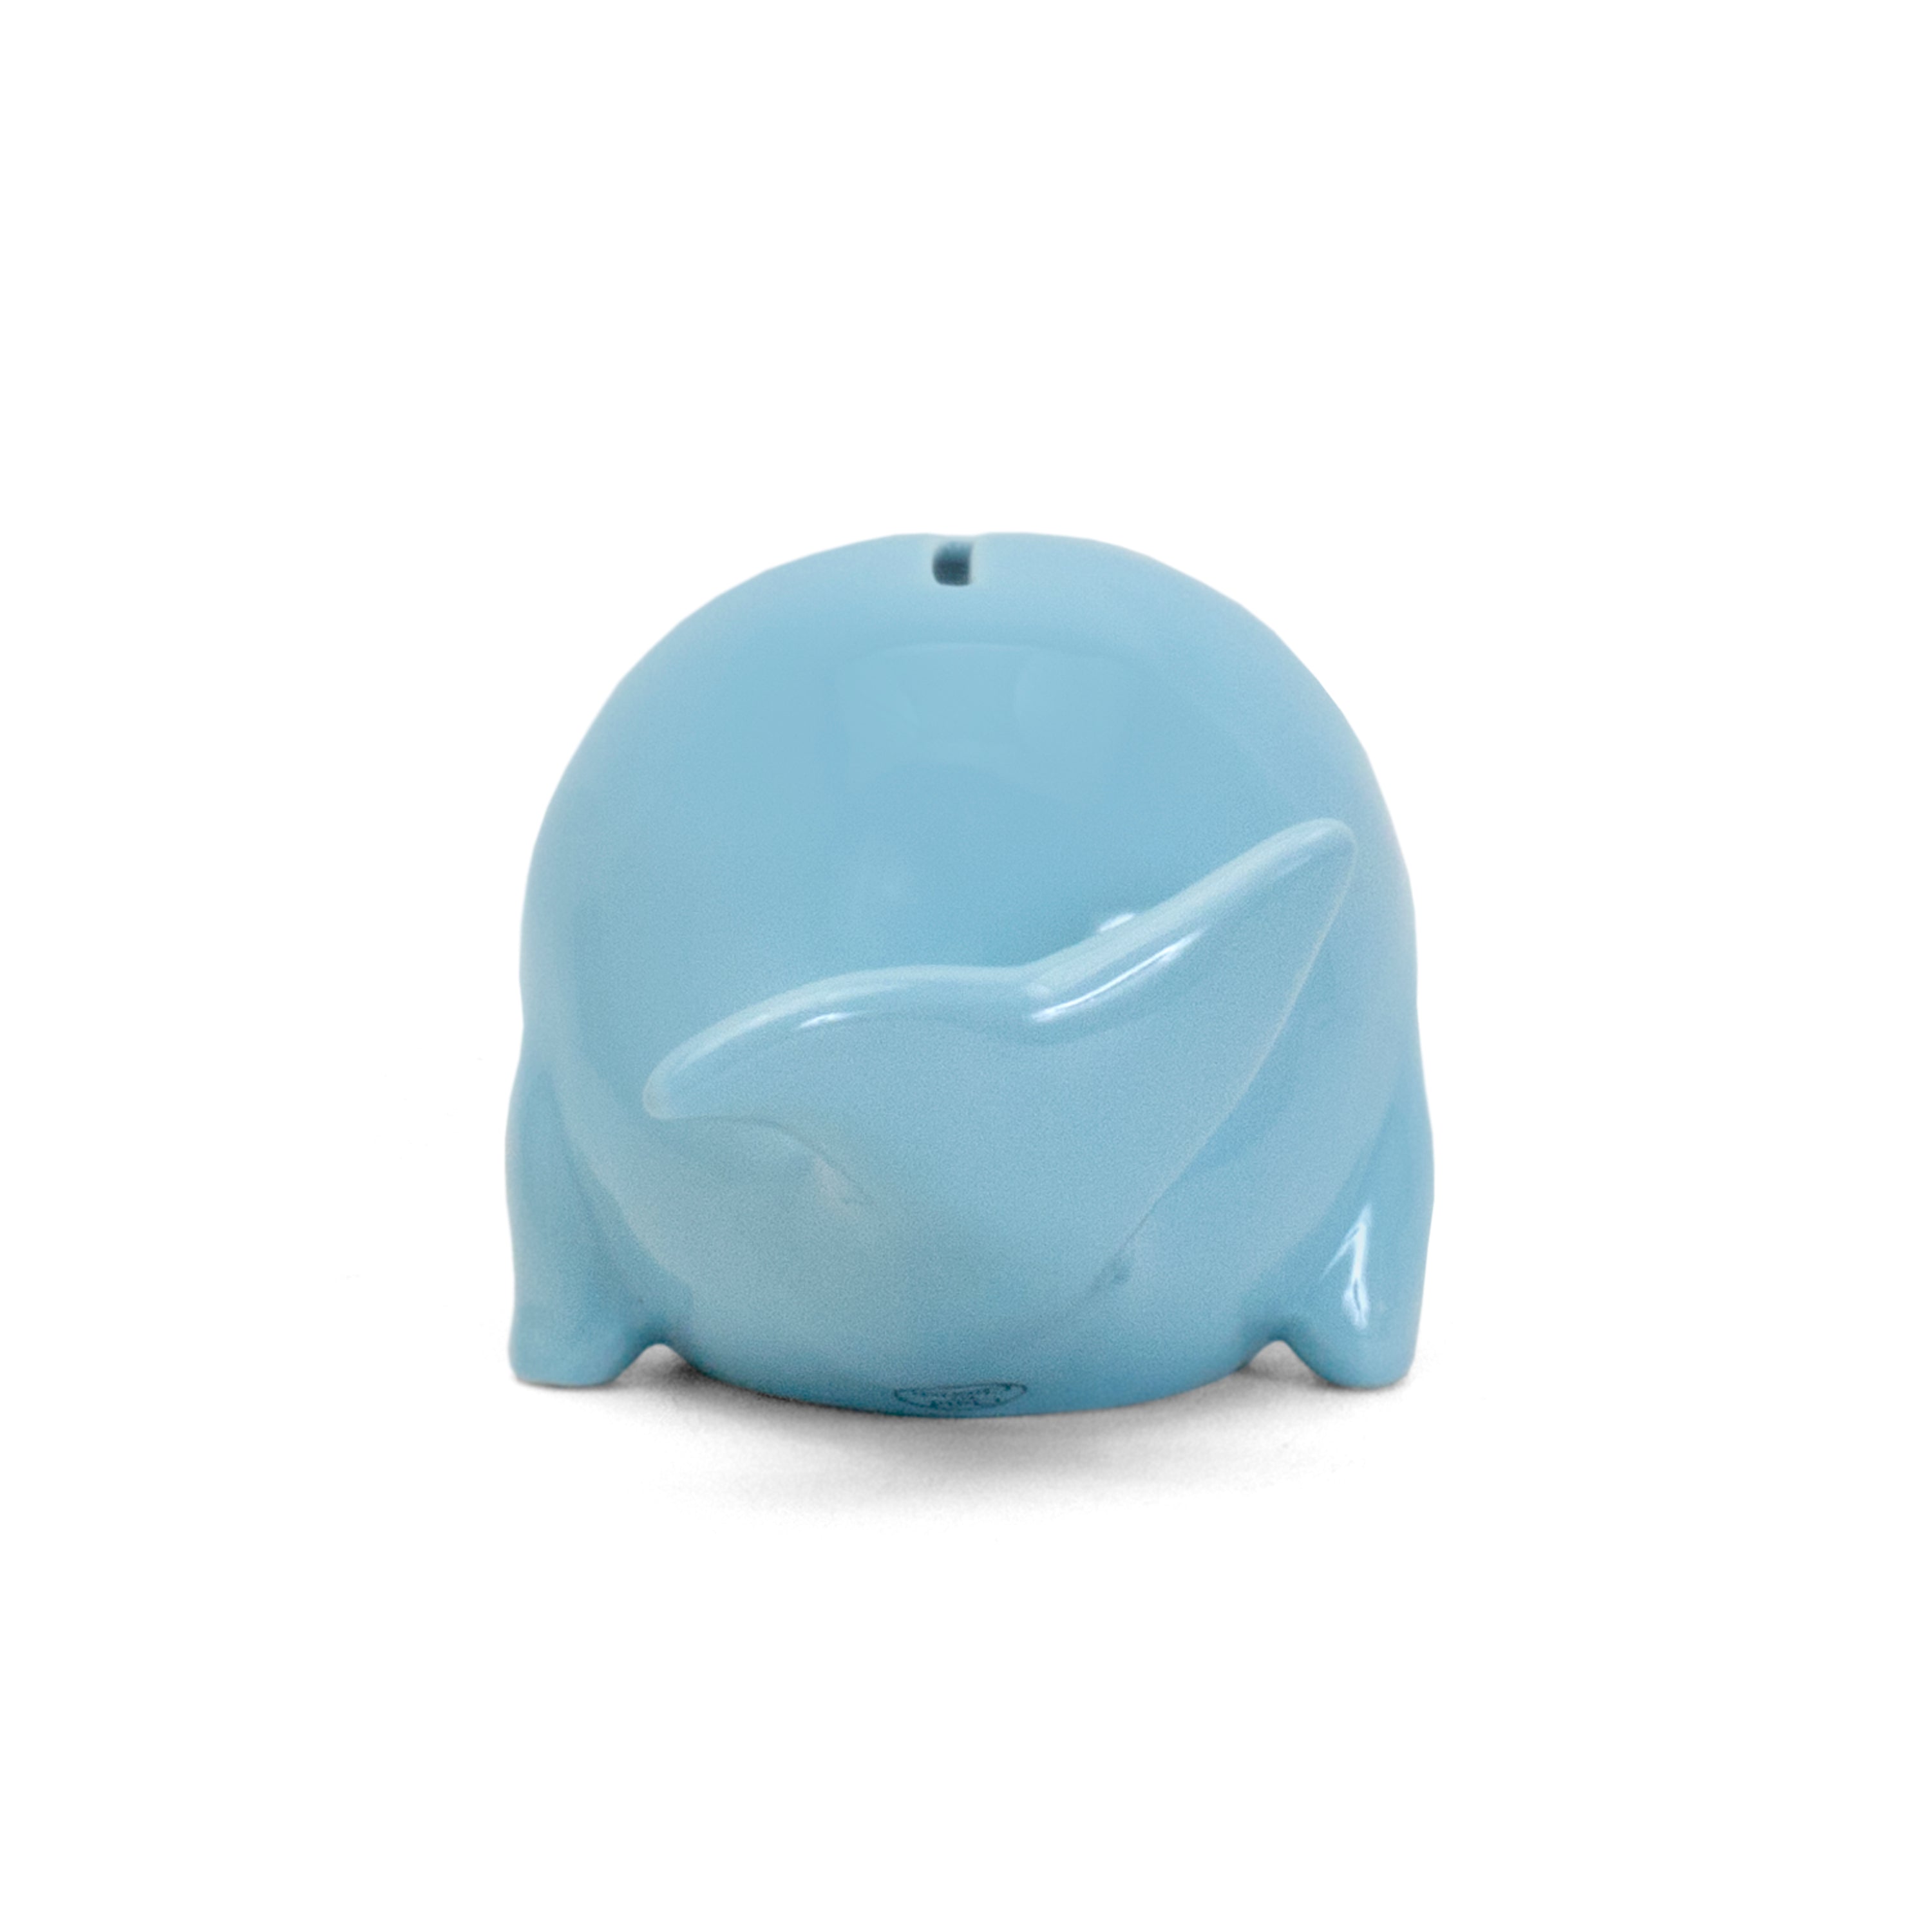 Blue Solid Whale Child to Cherish 